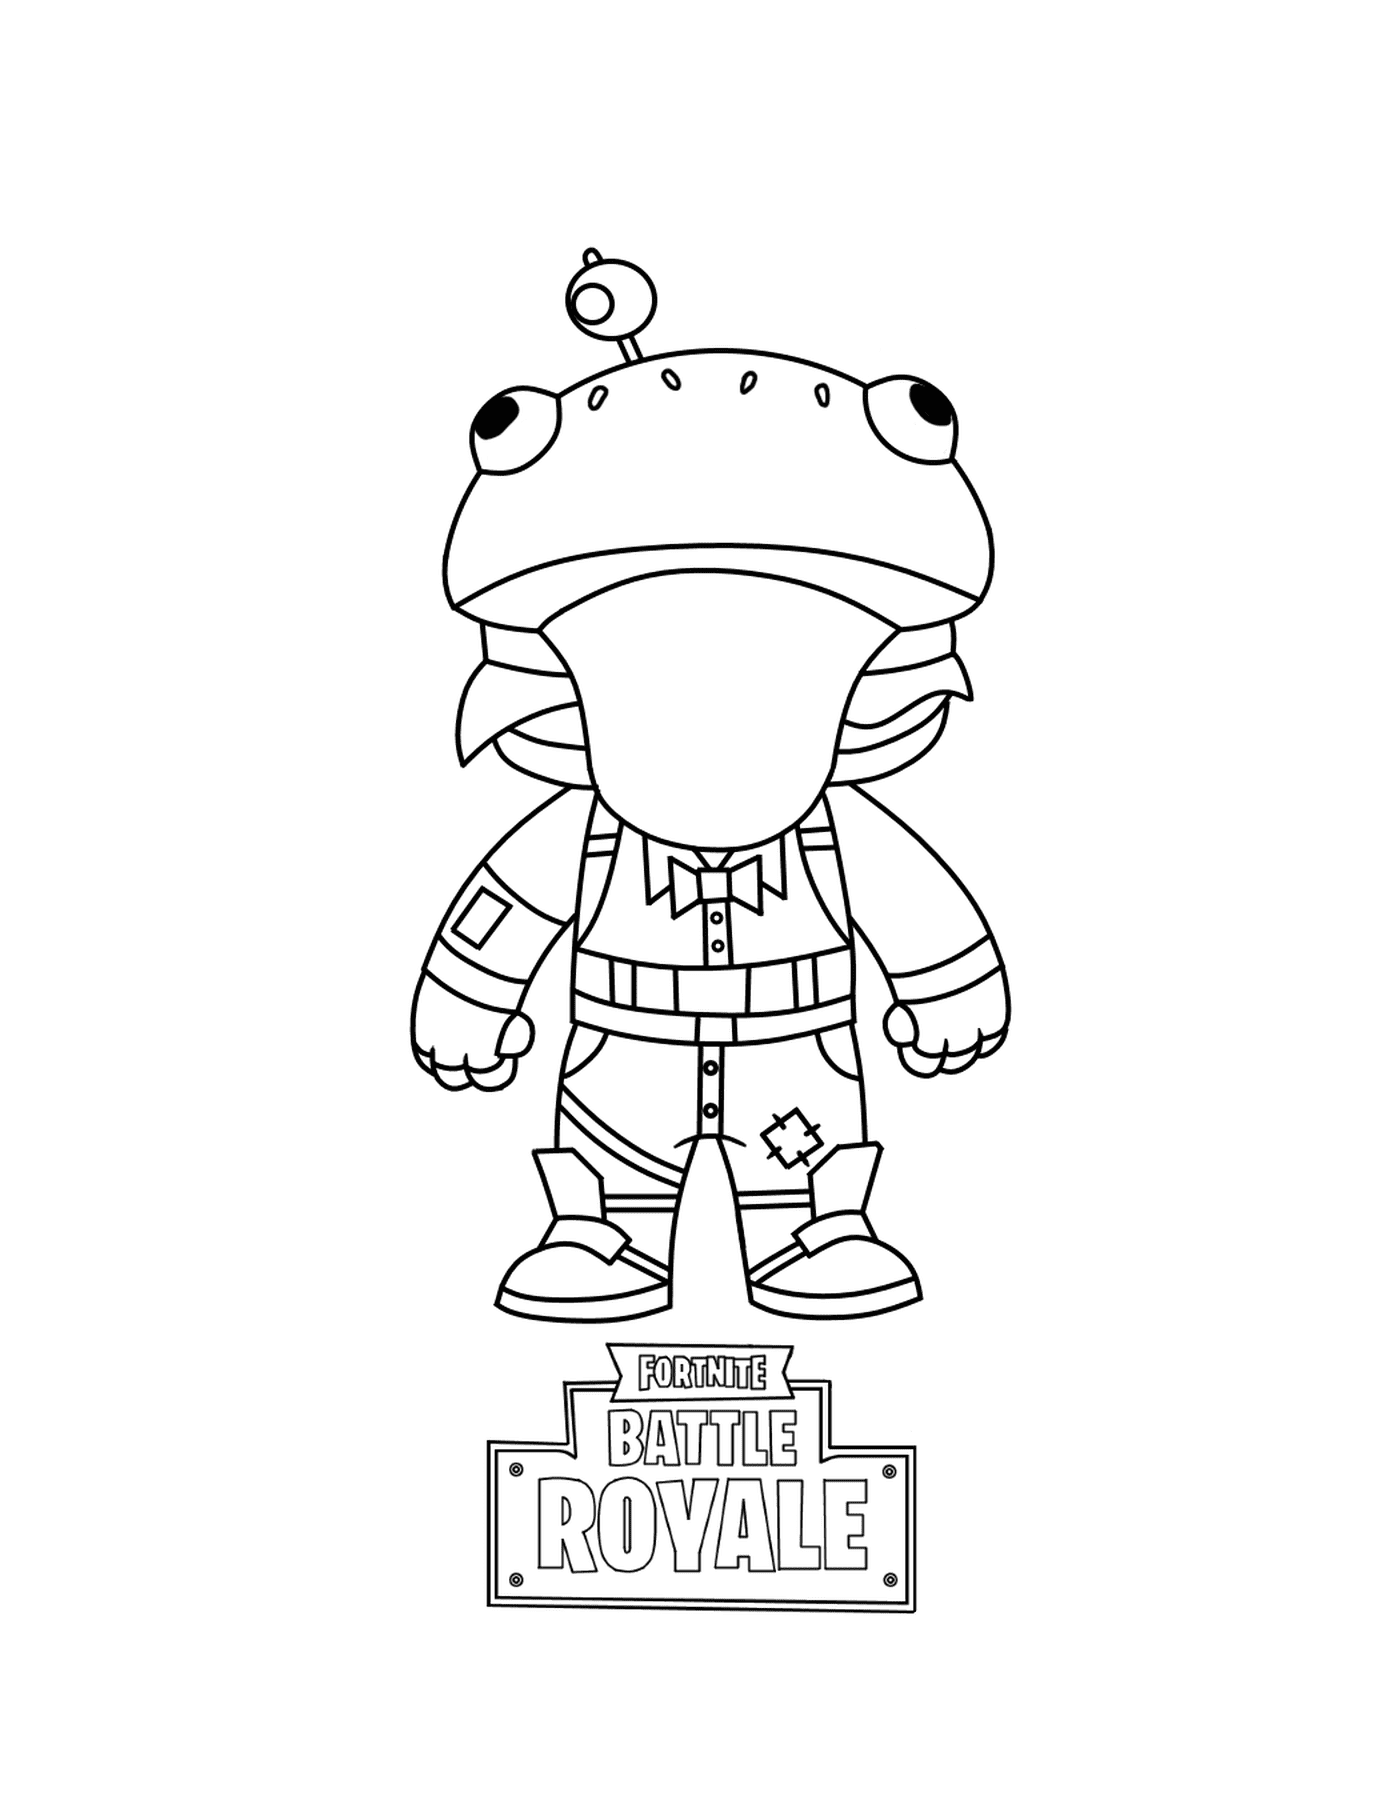  Fortnite Mini FrogCity name (optional, probably does not need a translation) 